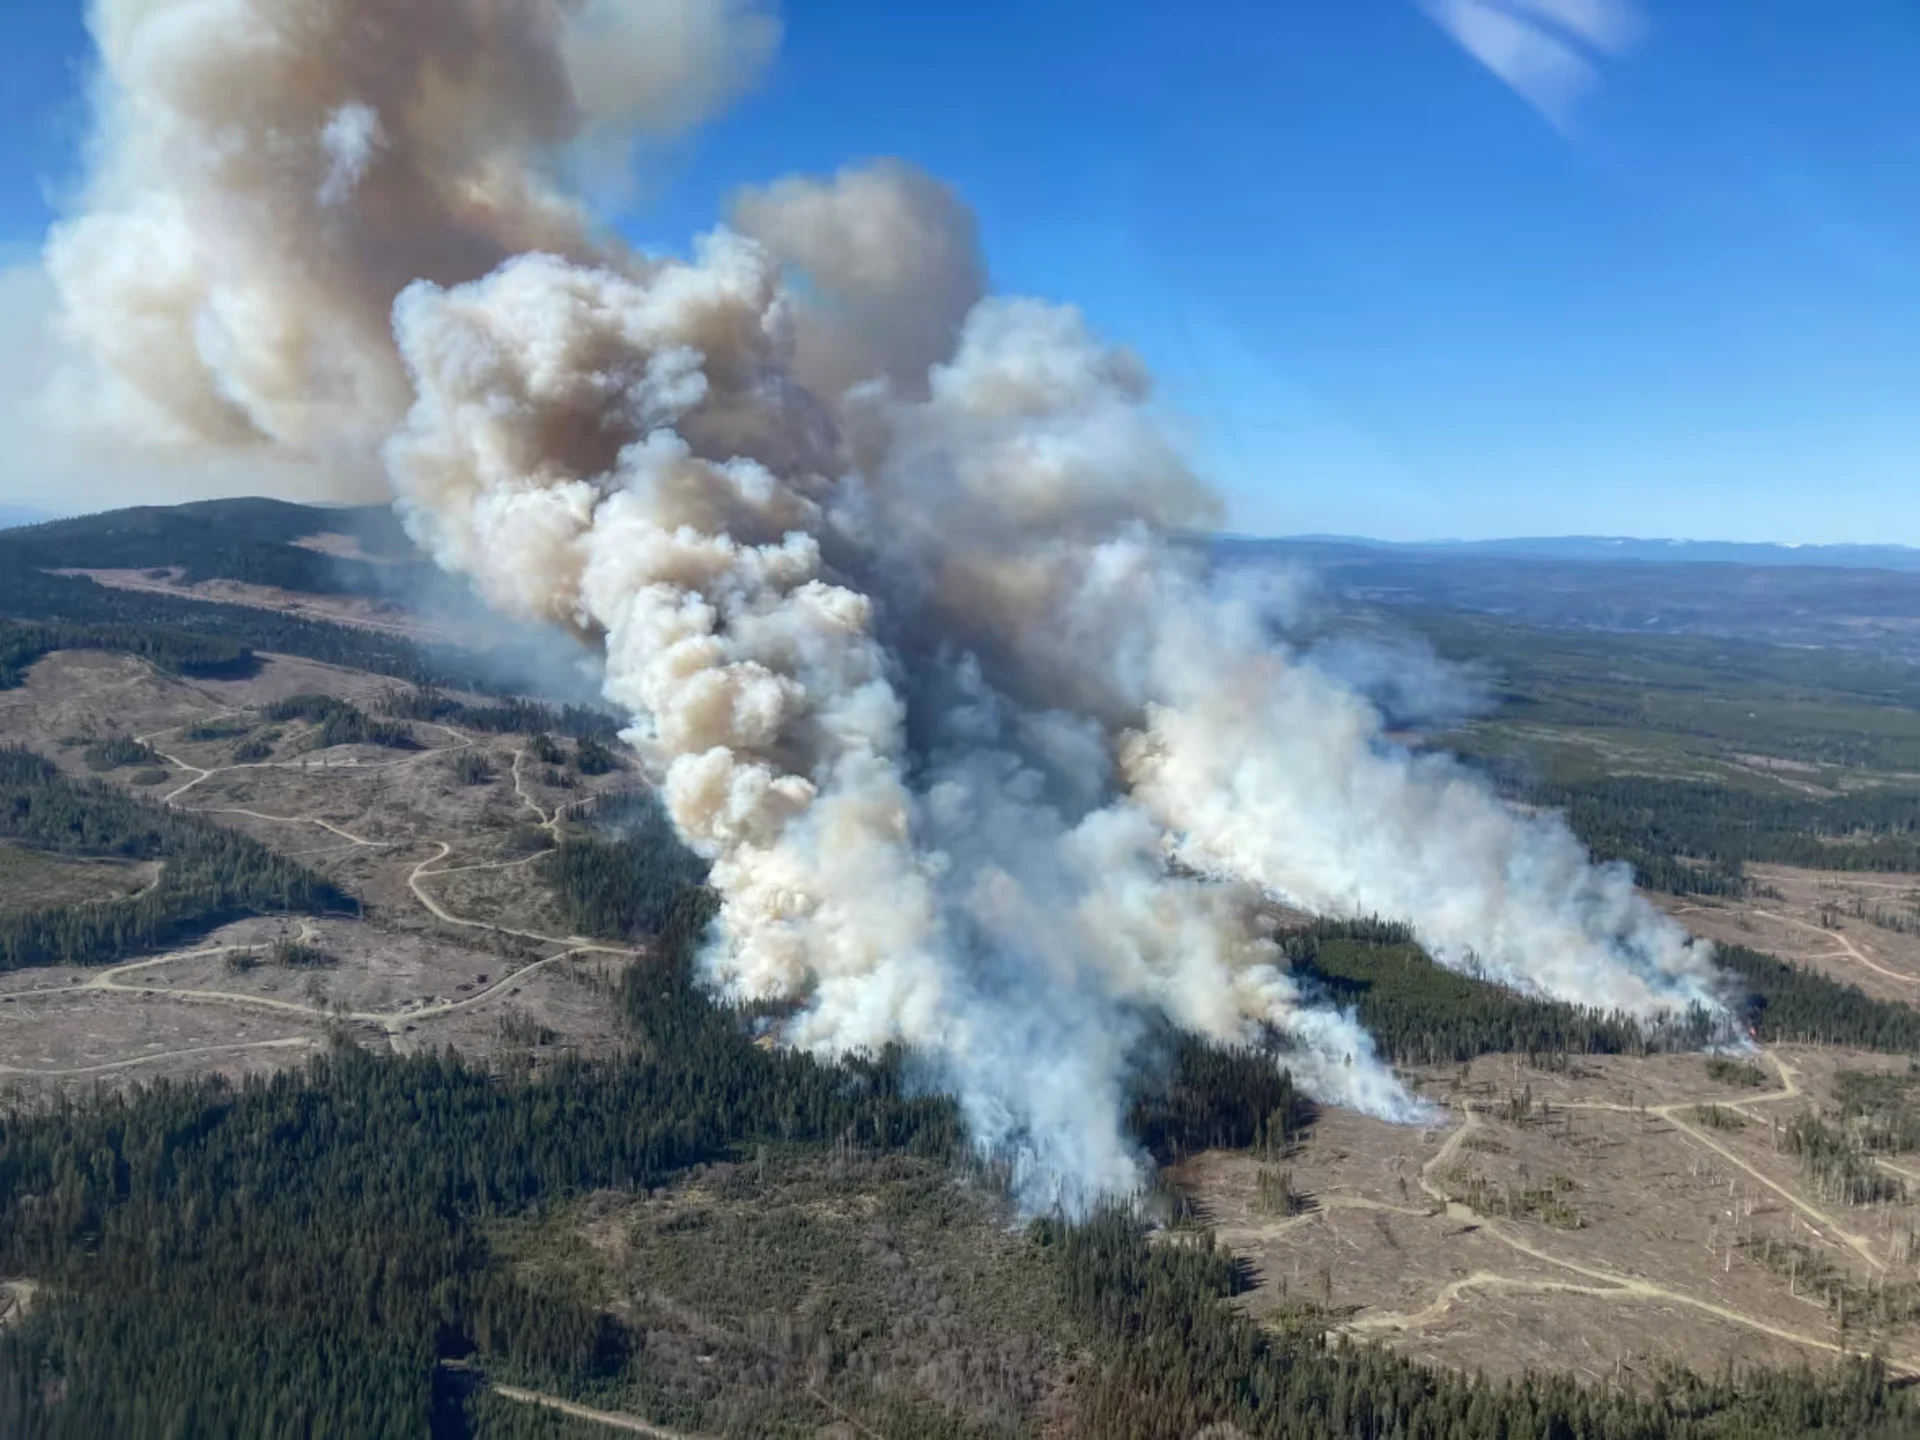 Evacuation order issued in Chetwynd, B.C., due to wildfire